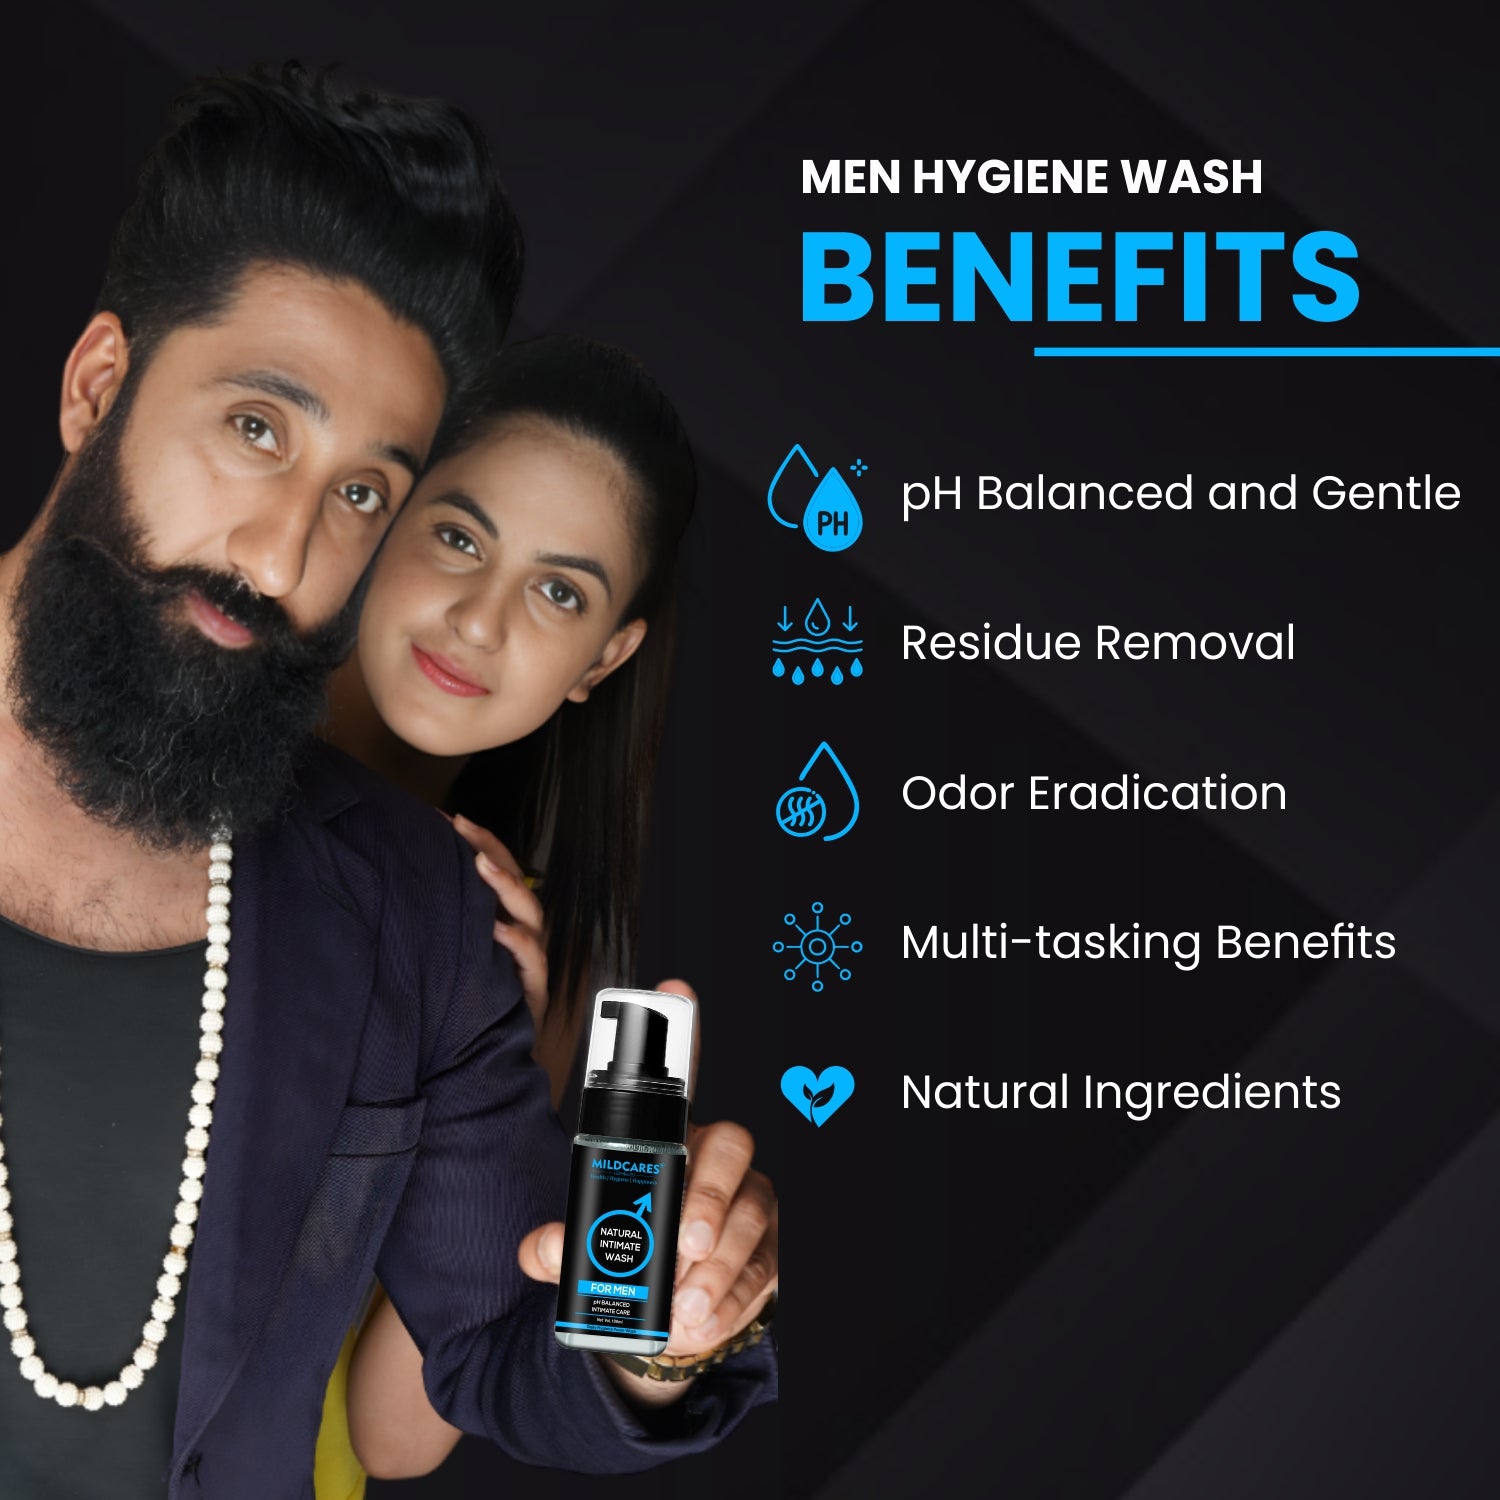 Mildcares Intimate Wash For Men, Enriched with Tea Tree Oil & Aloe Vera Extract